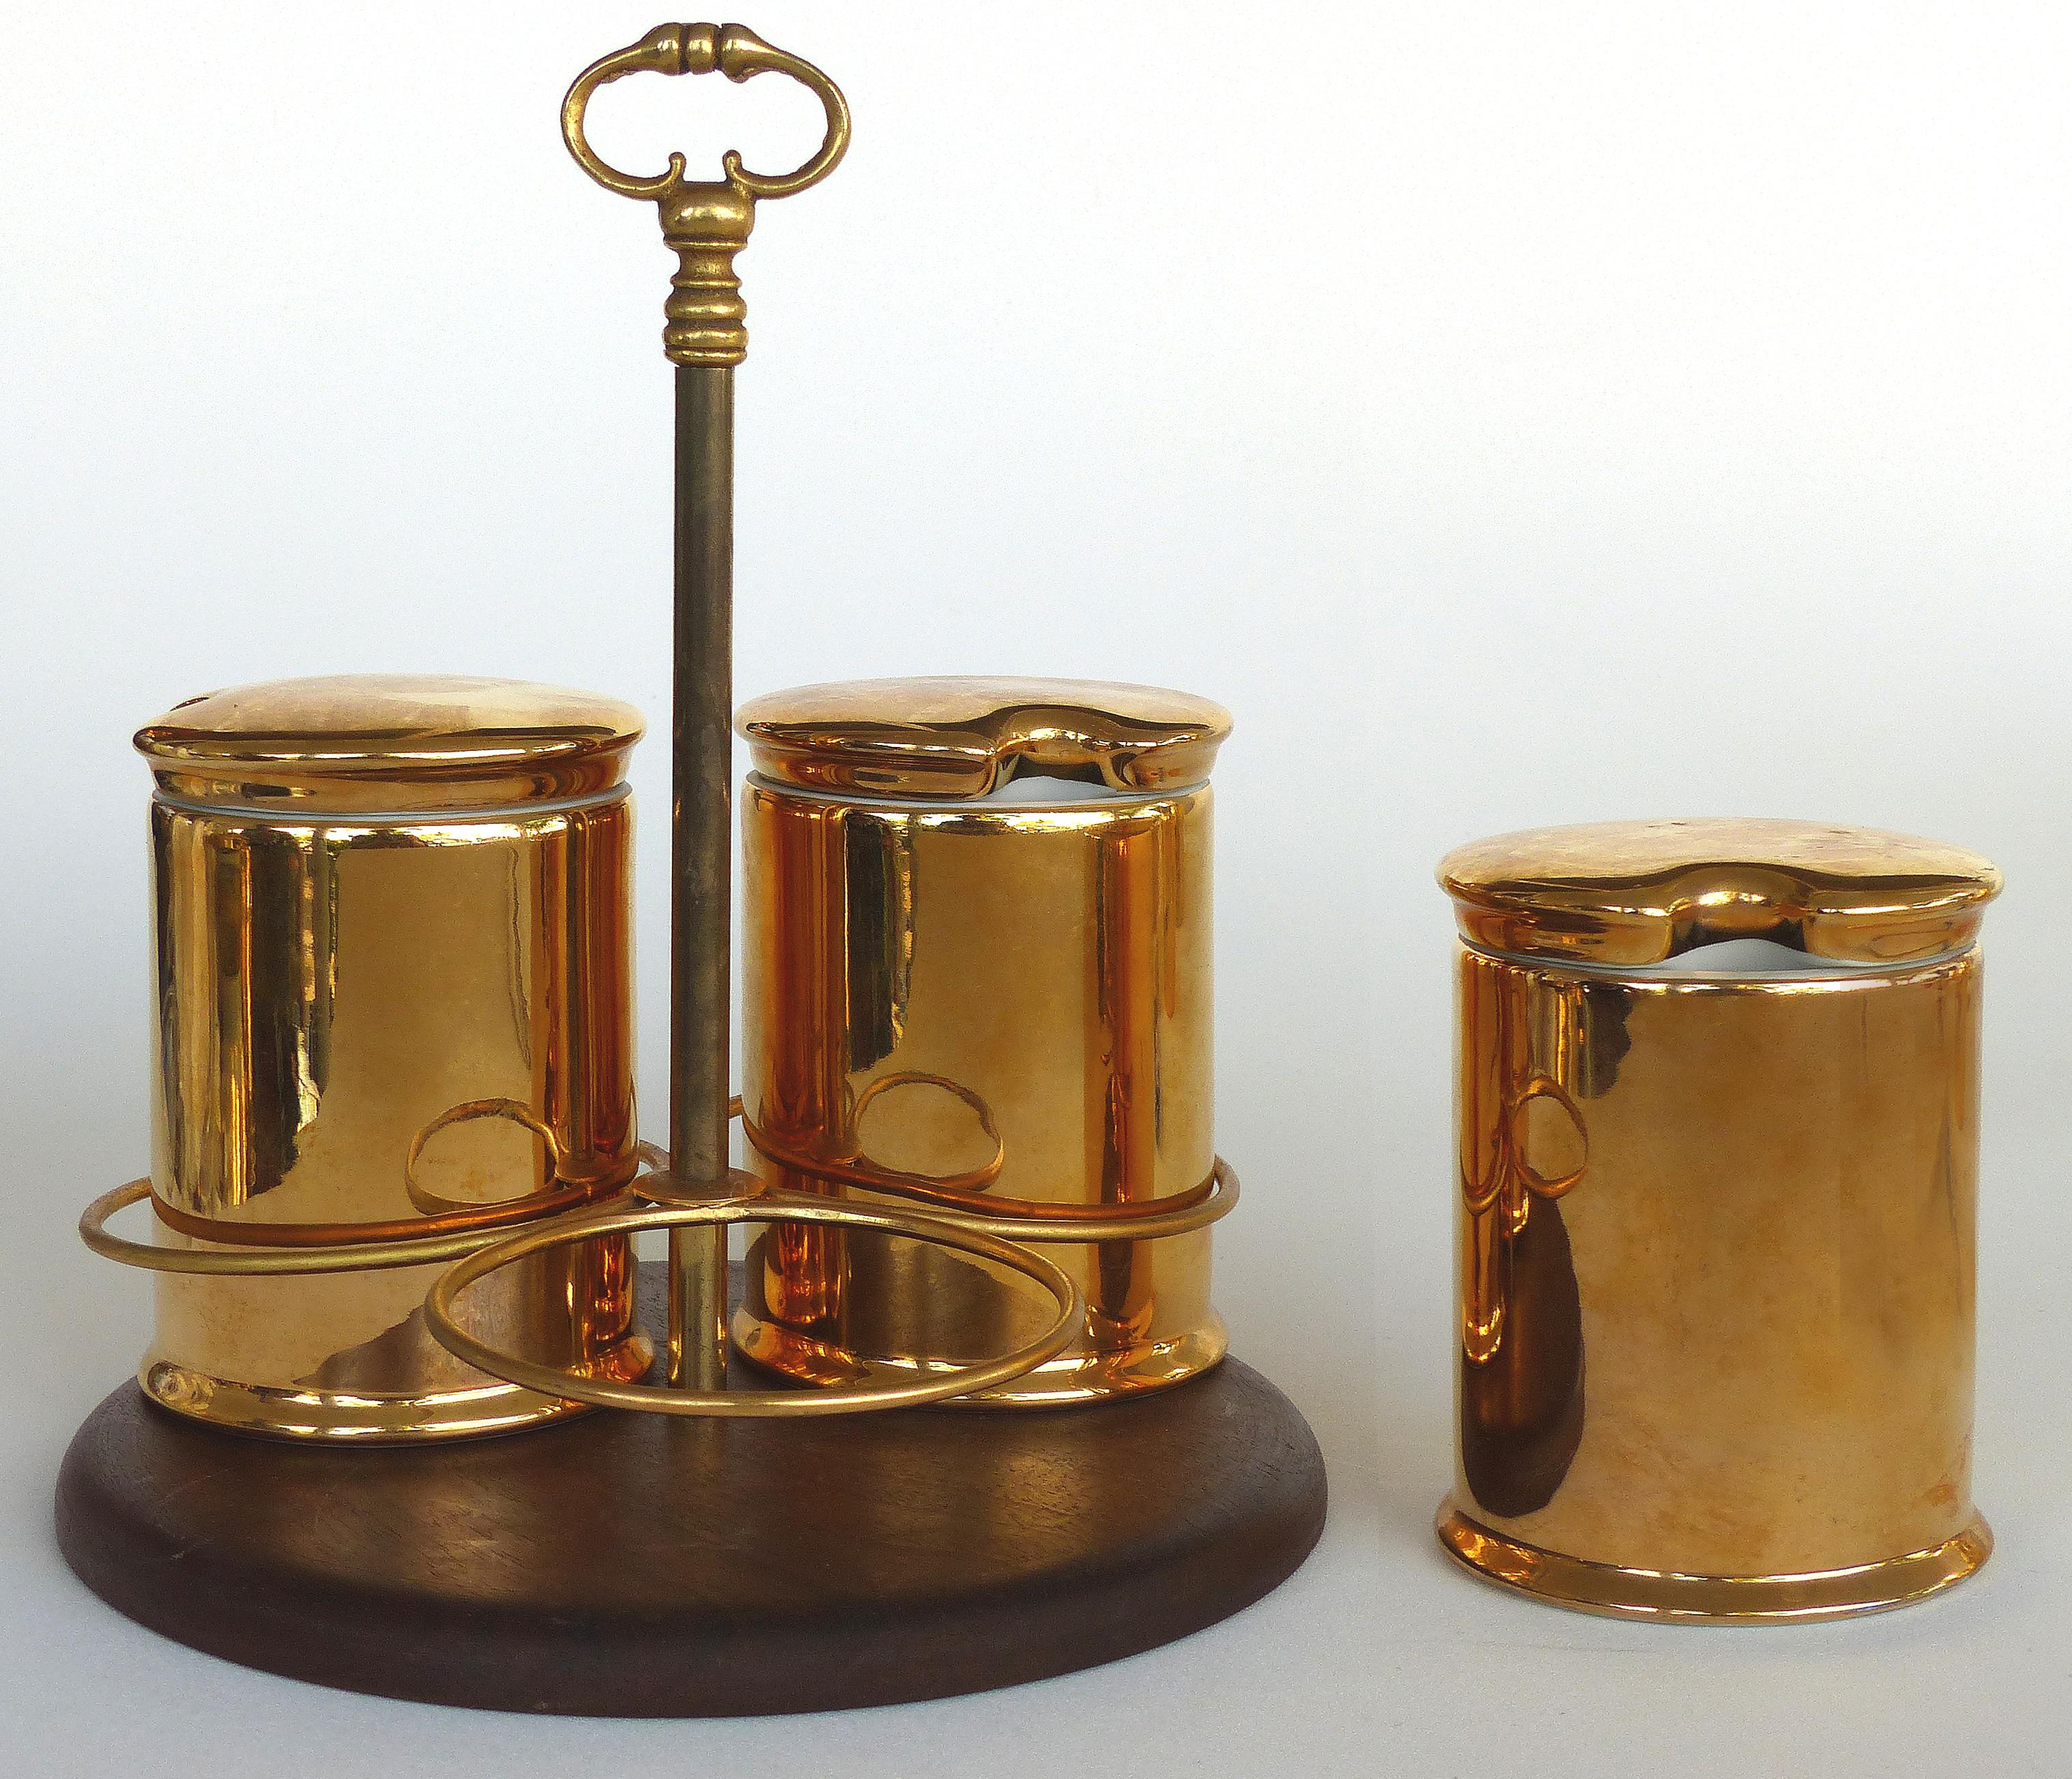 Porcelaine de Paris Gold Lustre Lidded Condiment Jars and Stand

Offered for sale is an unusual set of porcelain de Paris Gold Lustre lidded condiment jars and stand, the jars are fully marked and retain their lids. The stand is easily carried with